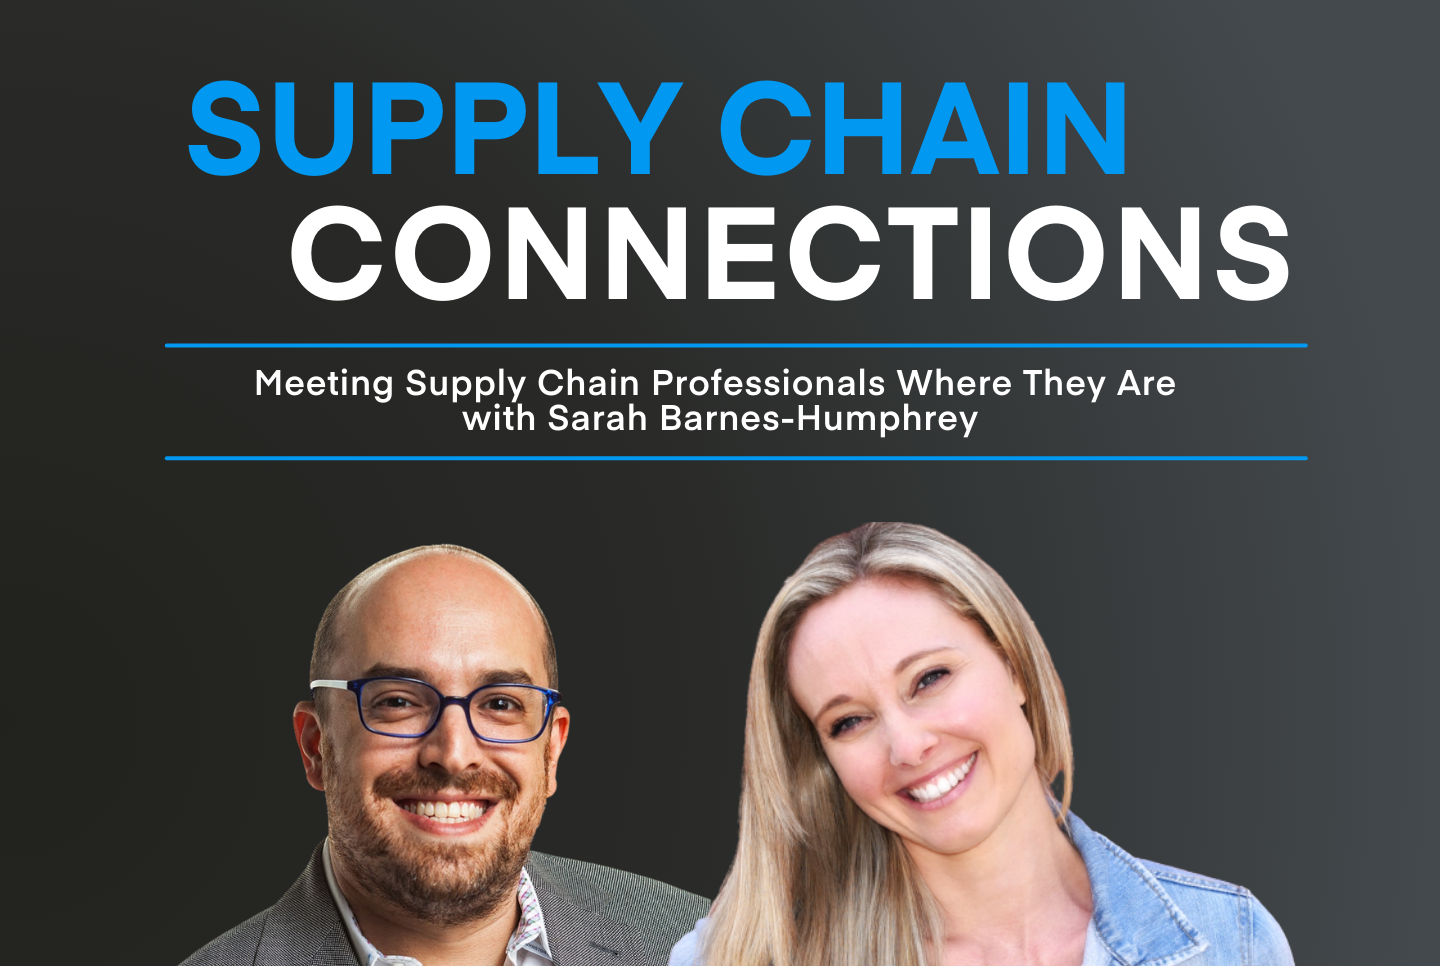 Sarah Barnes-Humphrey, Let's Talk Supply Chain - Supply Chain Connections Podcast